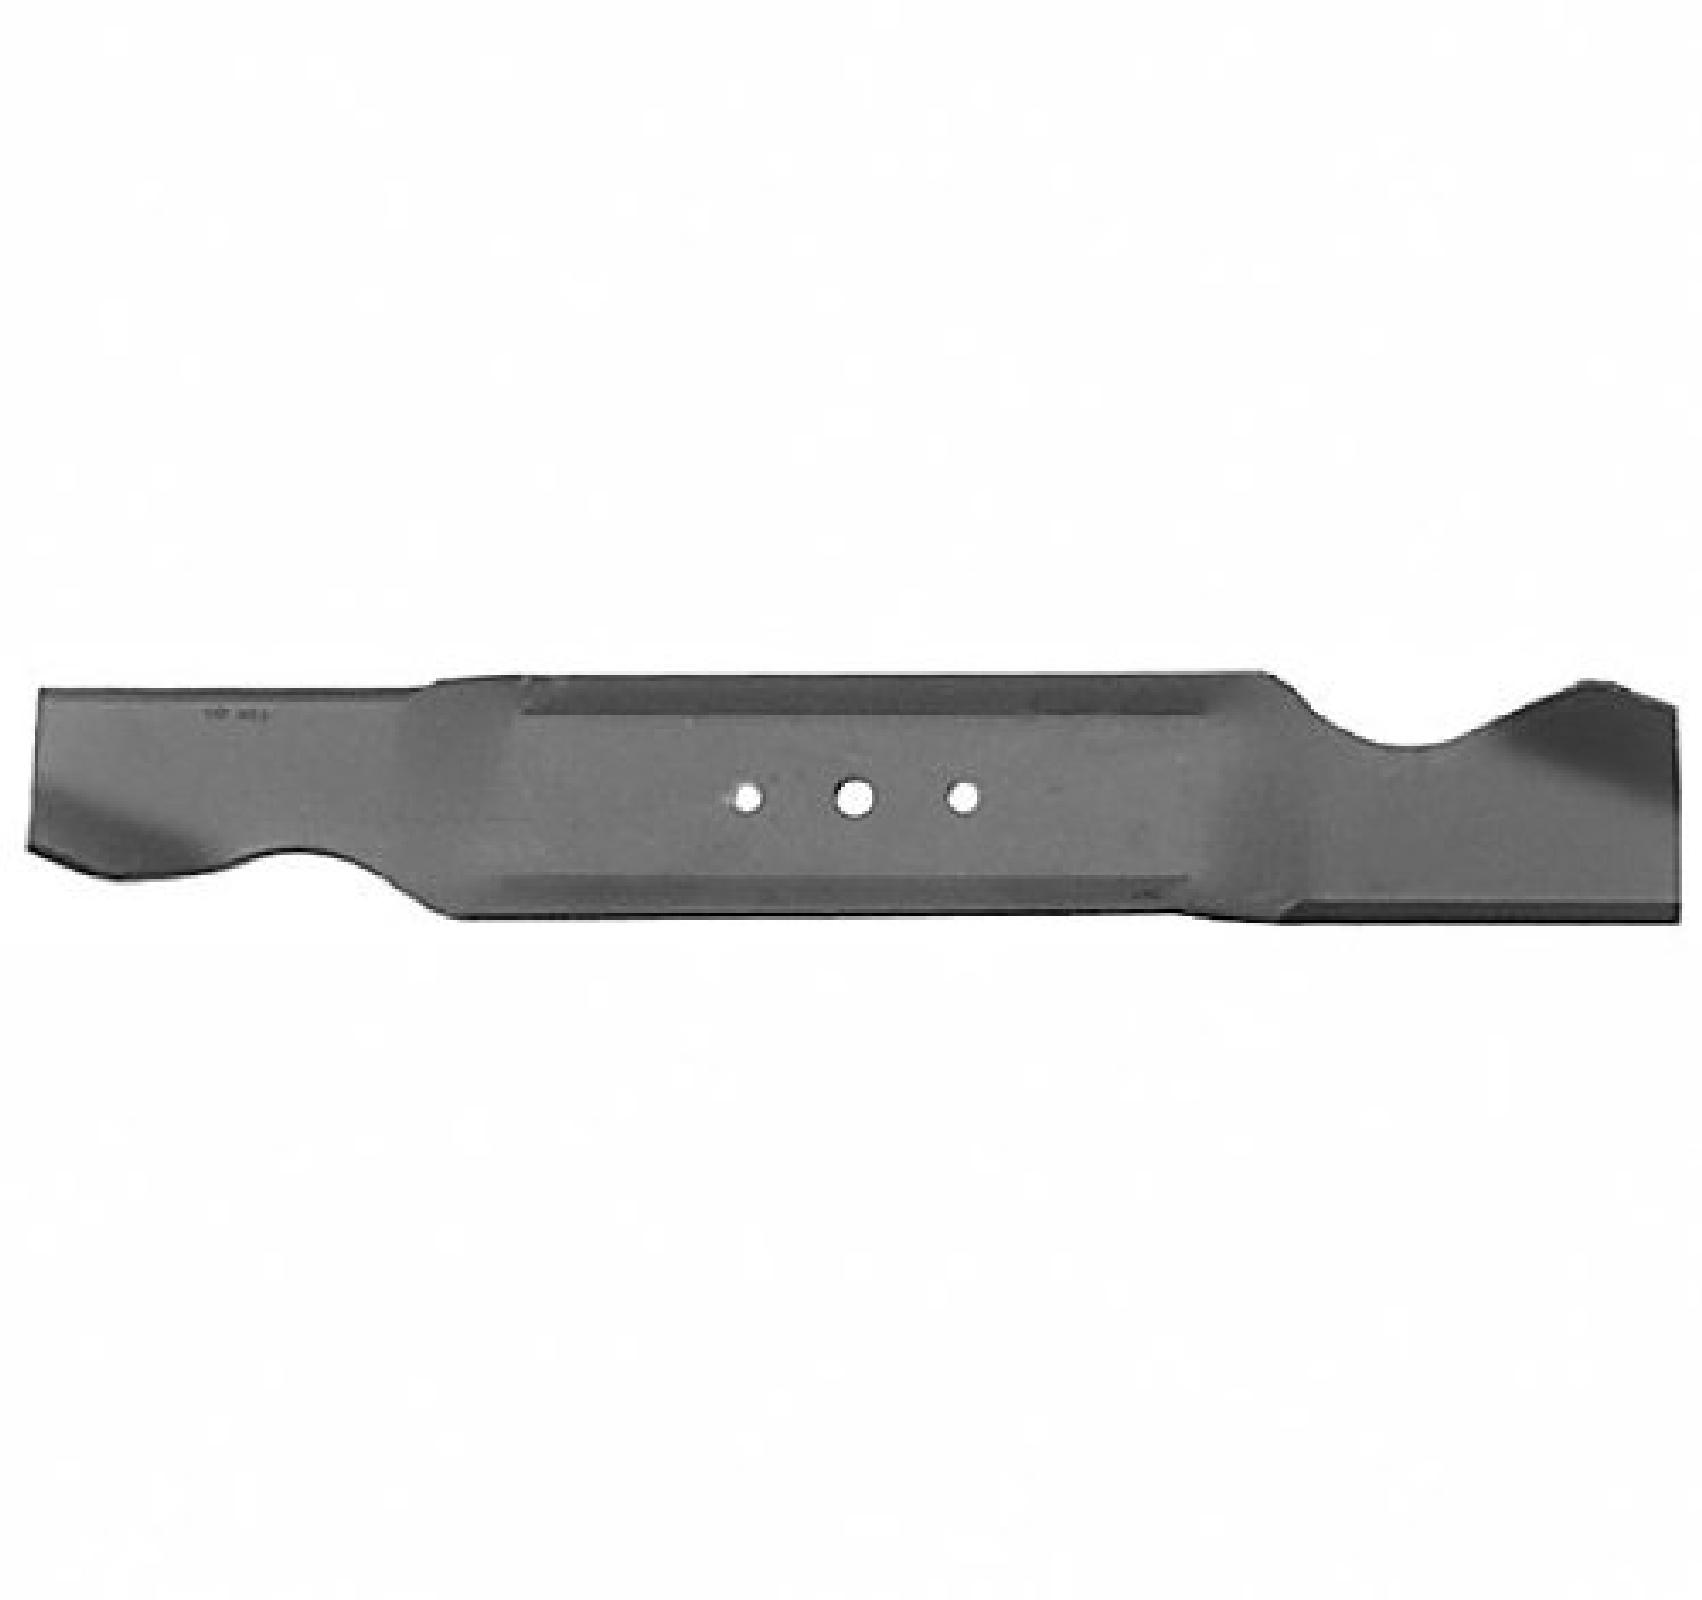 BLADE, MTD 942 0493, 19 3 part# 98-493 by Oregon - Click Image to Close